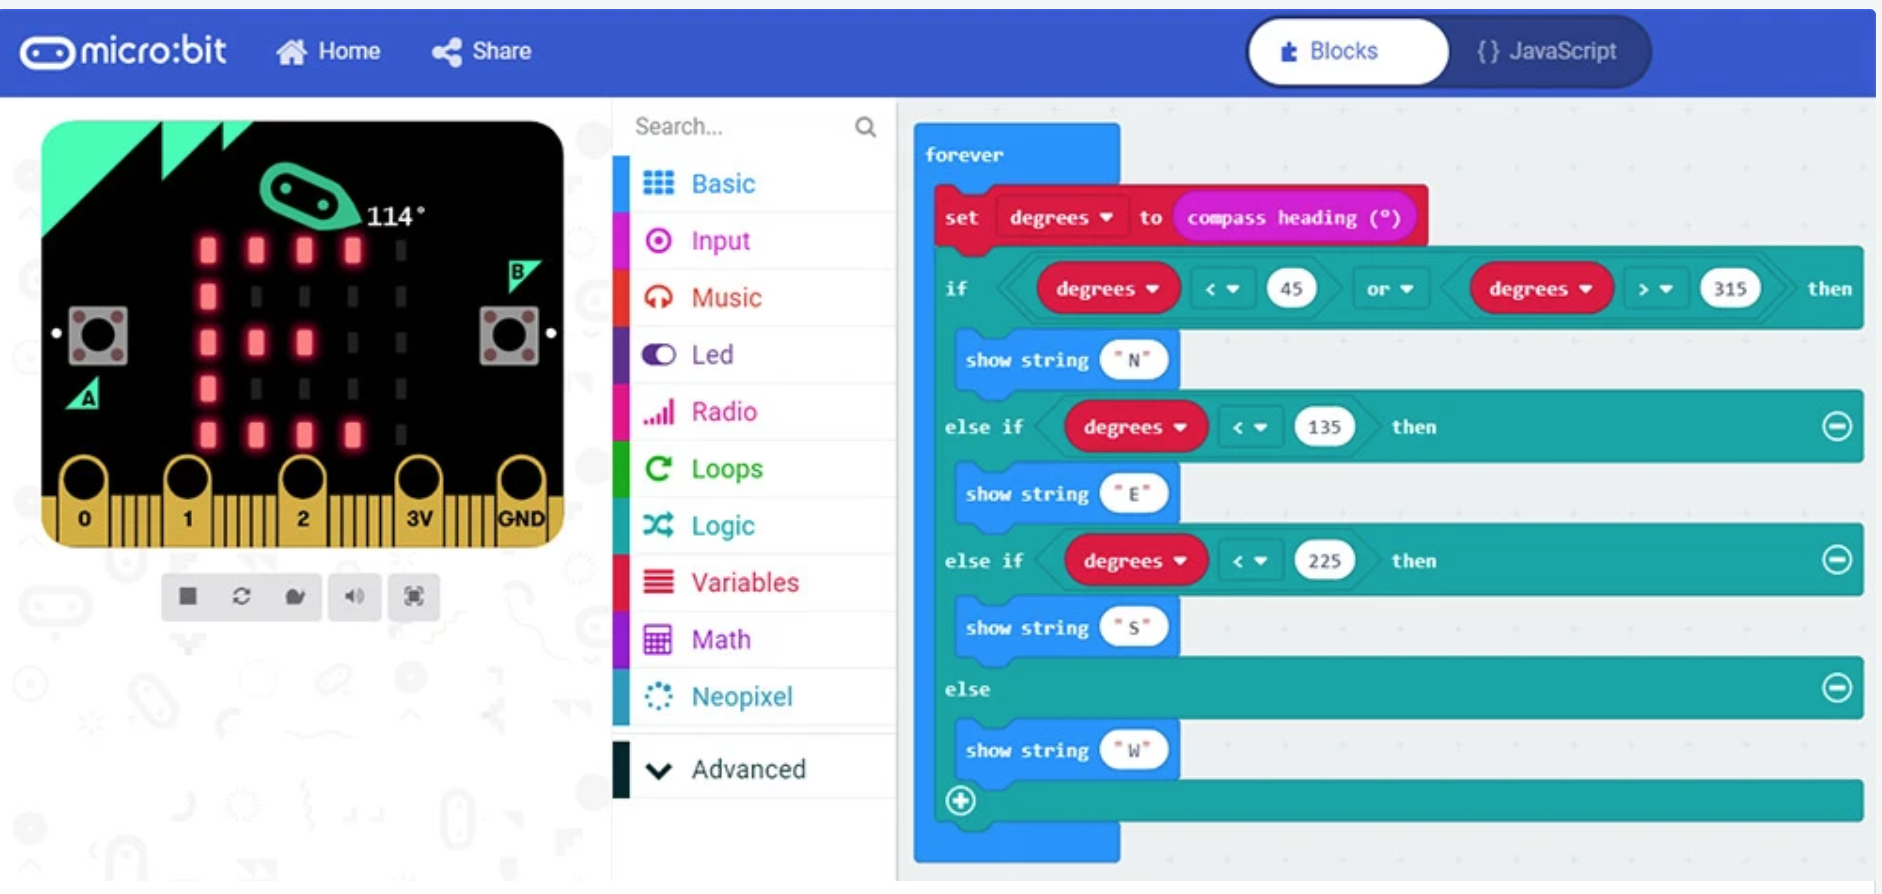 the microsoft makecode interface for programming the micro:bit